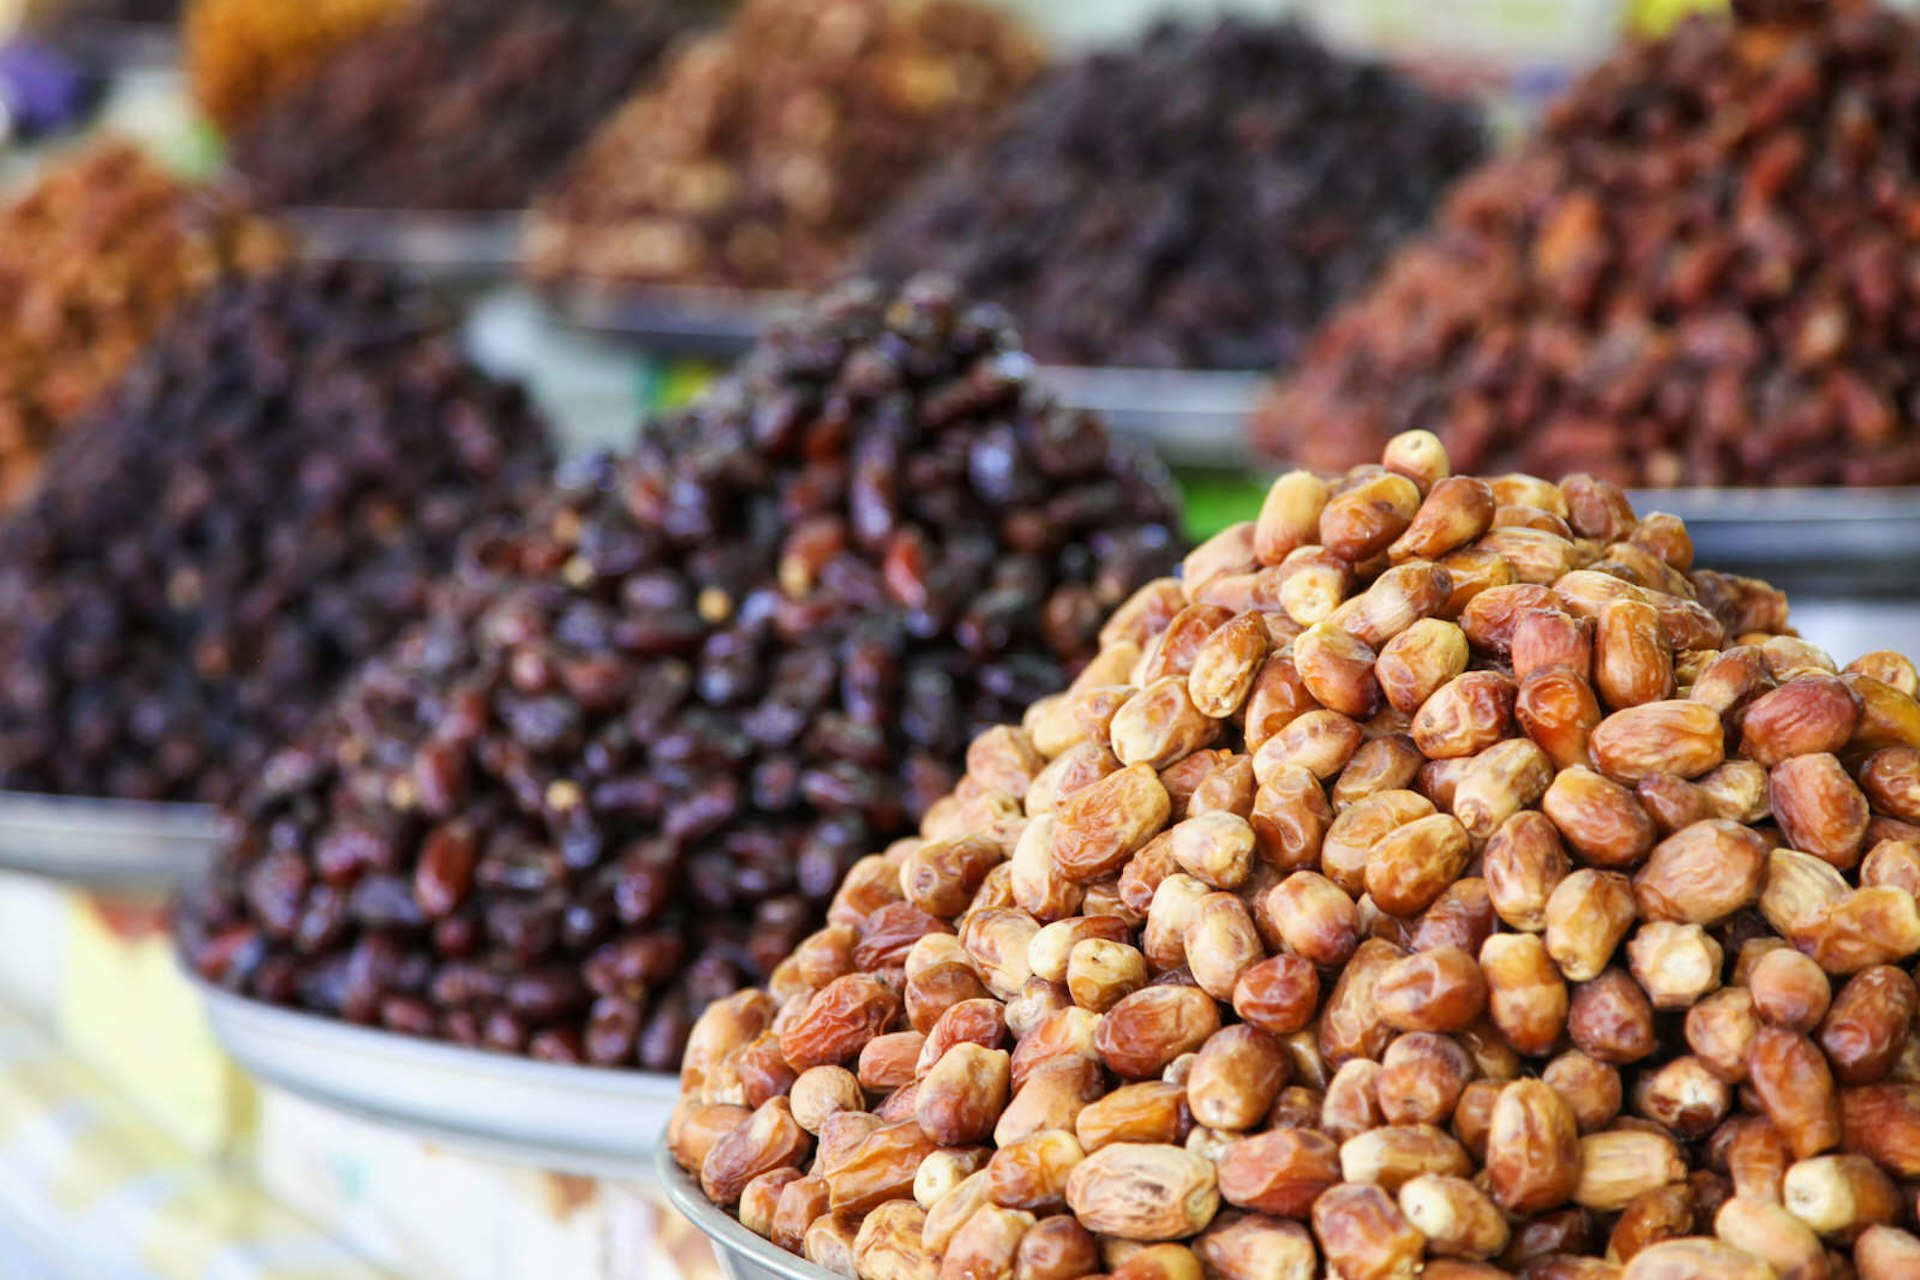 You'll find mounds of dates at Dubai's markets, but don't miss the beautifully presented dates from Bateel, Dubai, United Arab Emirates